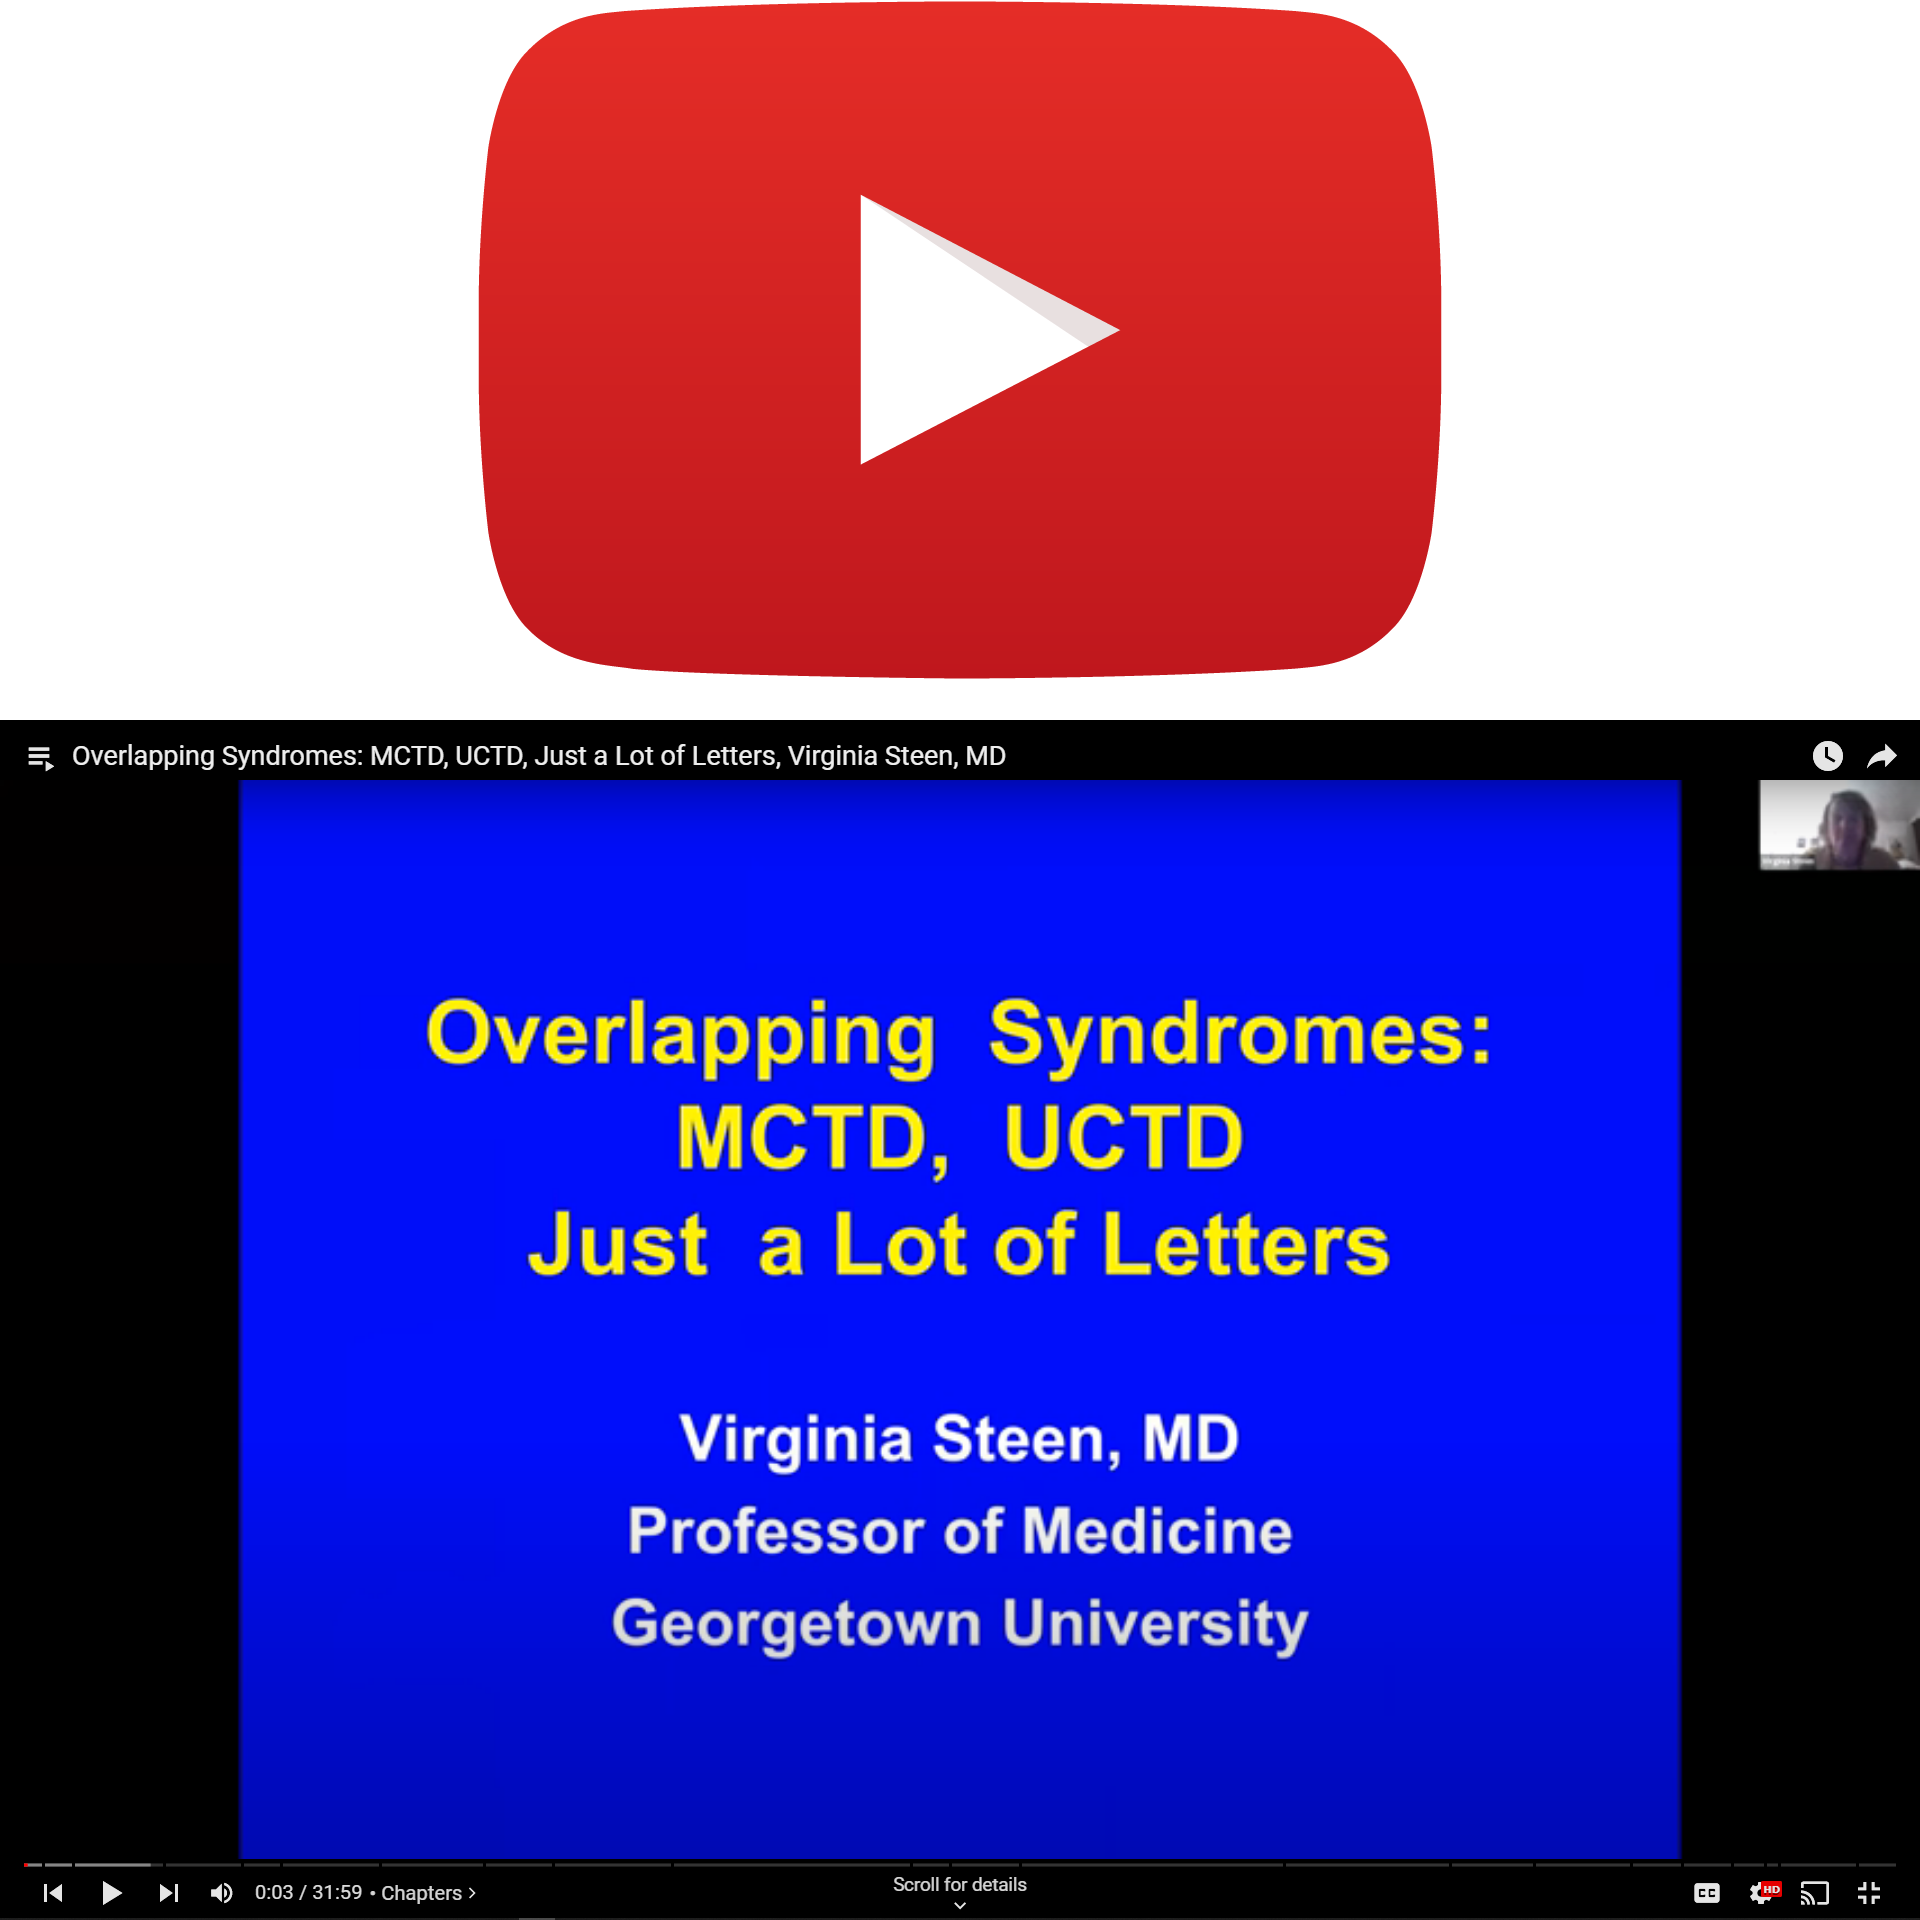 YouTube 2021 Conference Overlapping Syndromes Steen